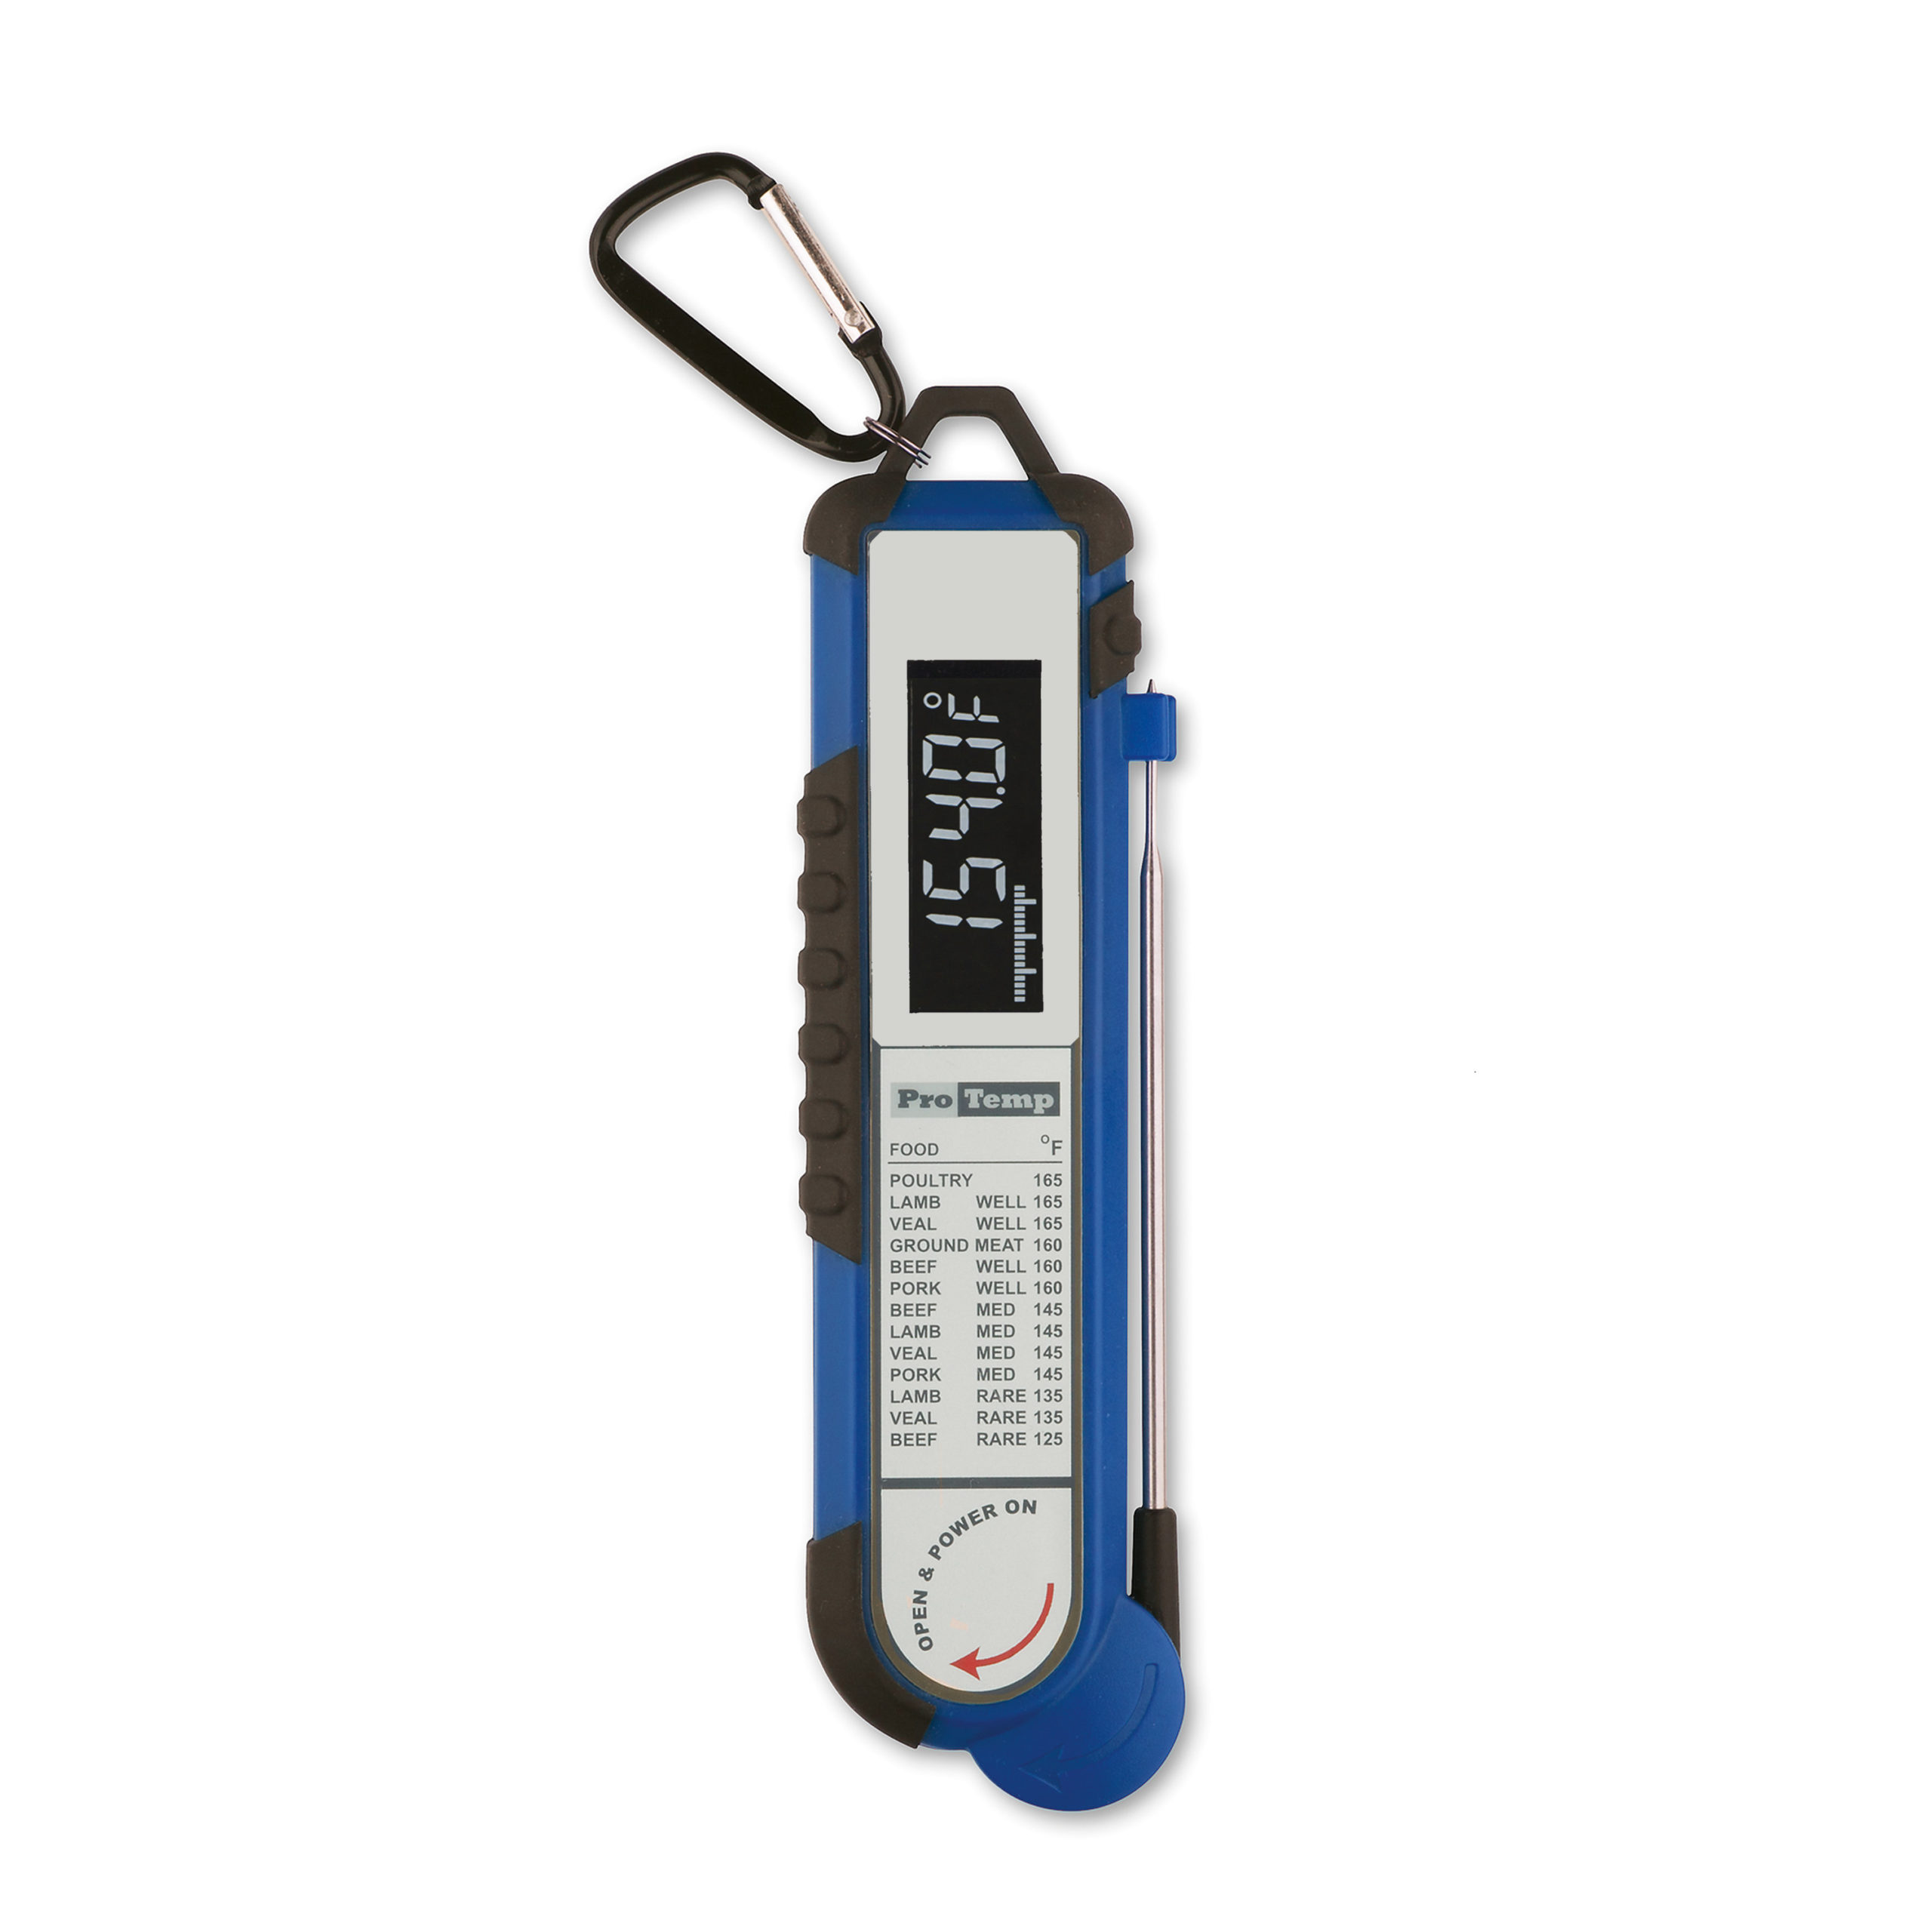 New RPT-100 predictive thermometer from Riester offers fast and reliable  readings